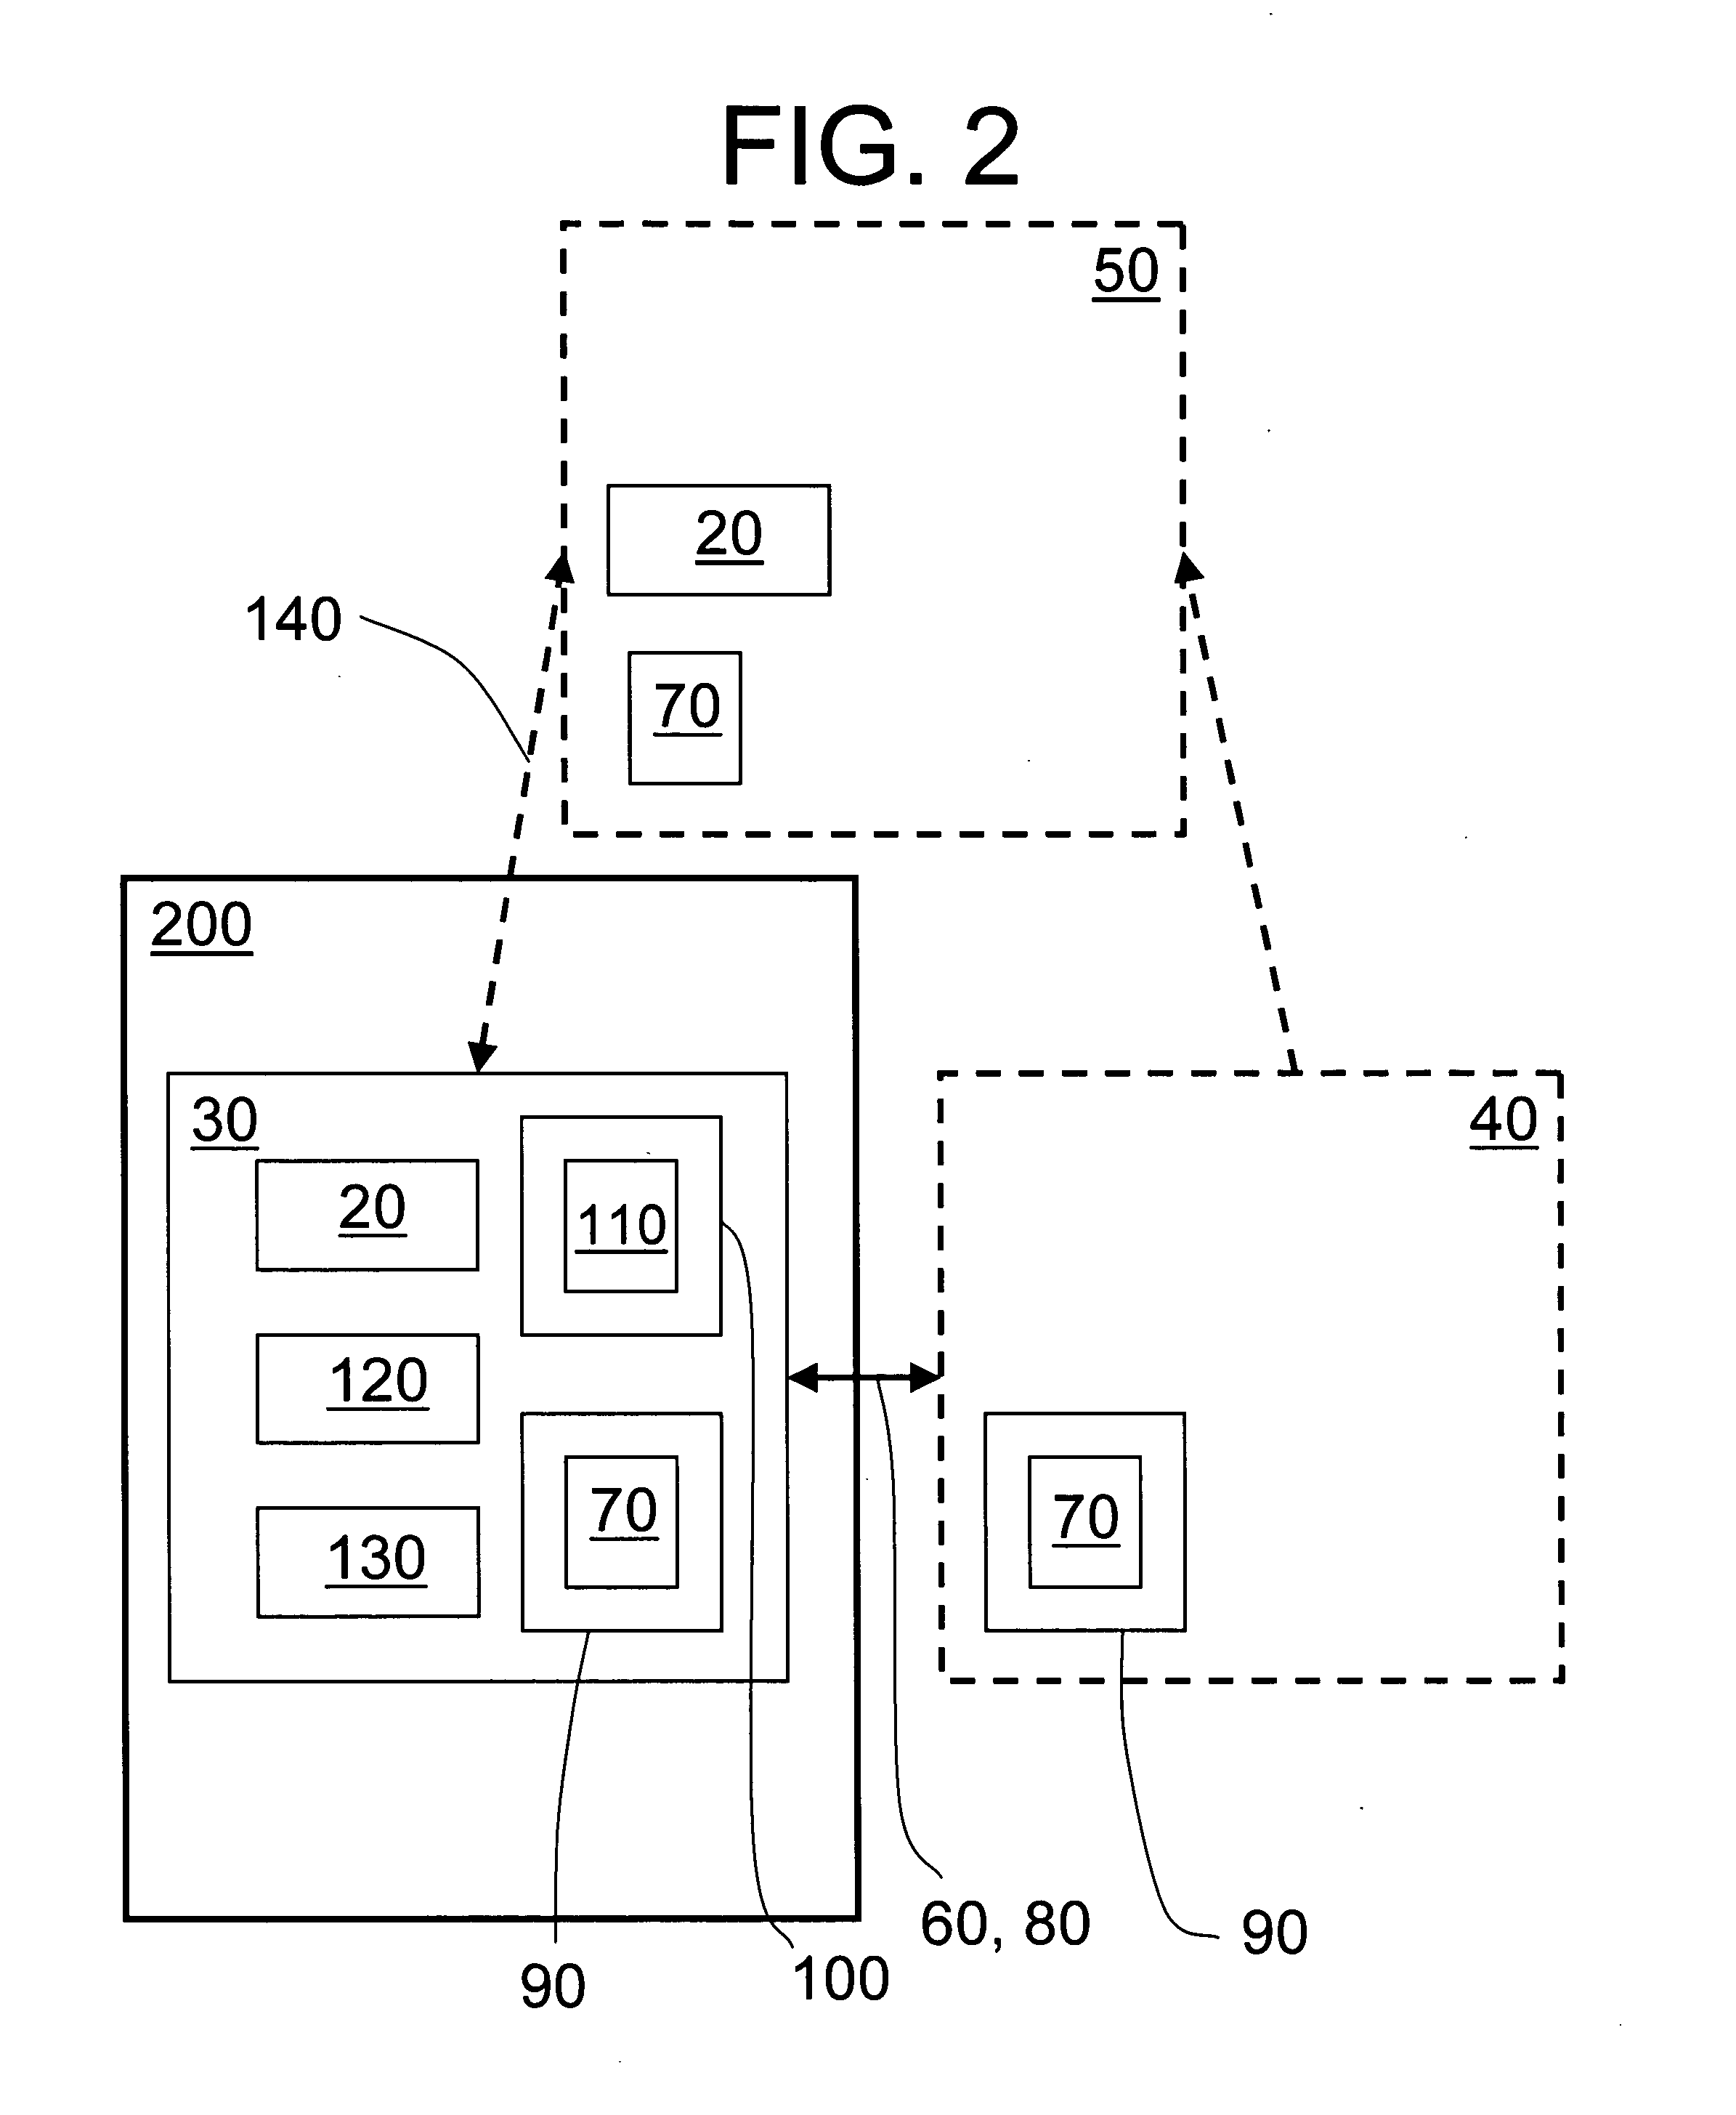 Method and system for transferring a file between data processing devices using a communication or instant messaging program